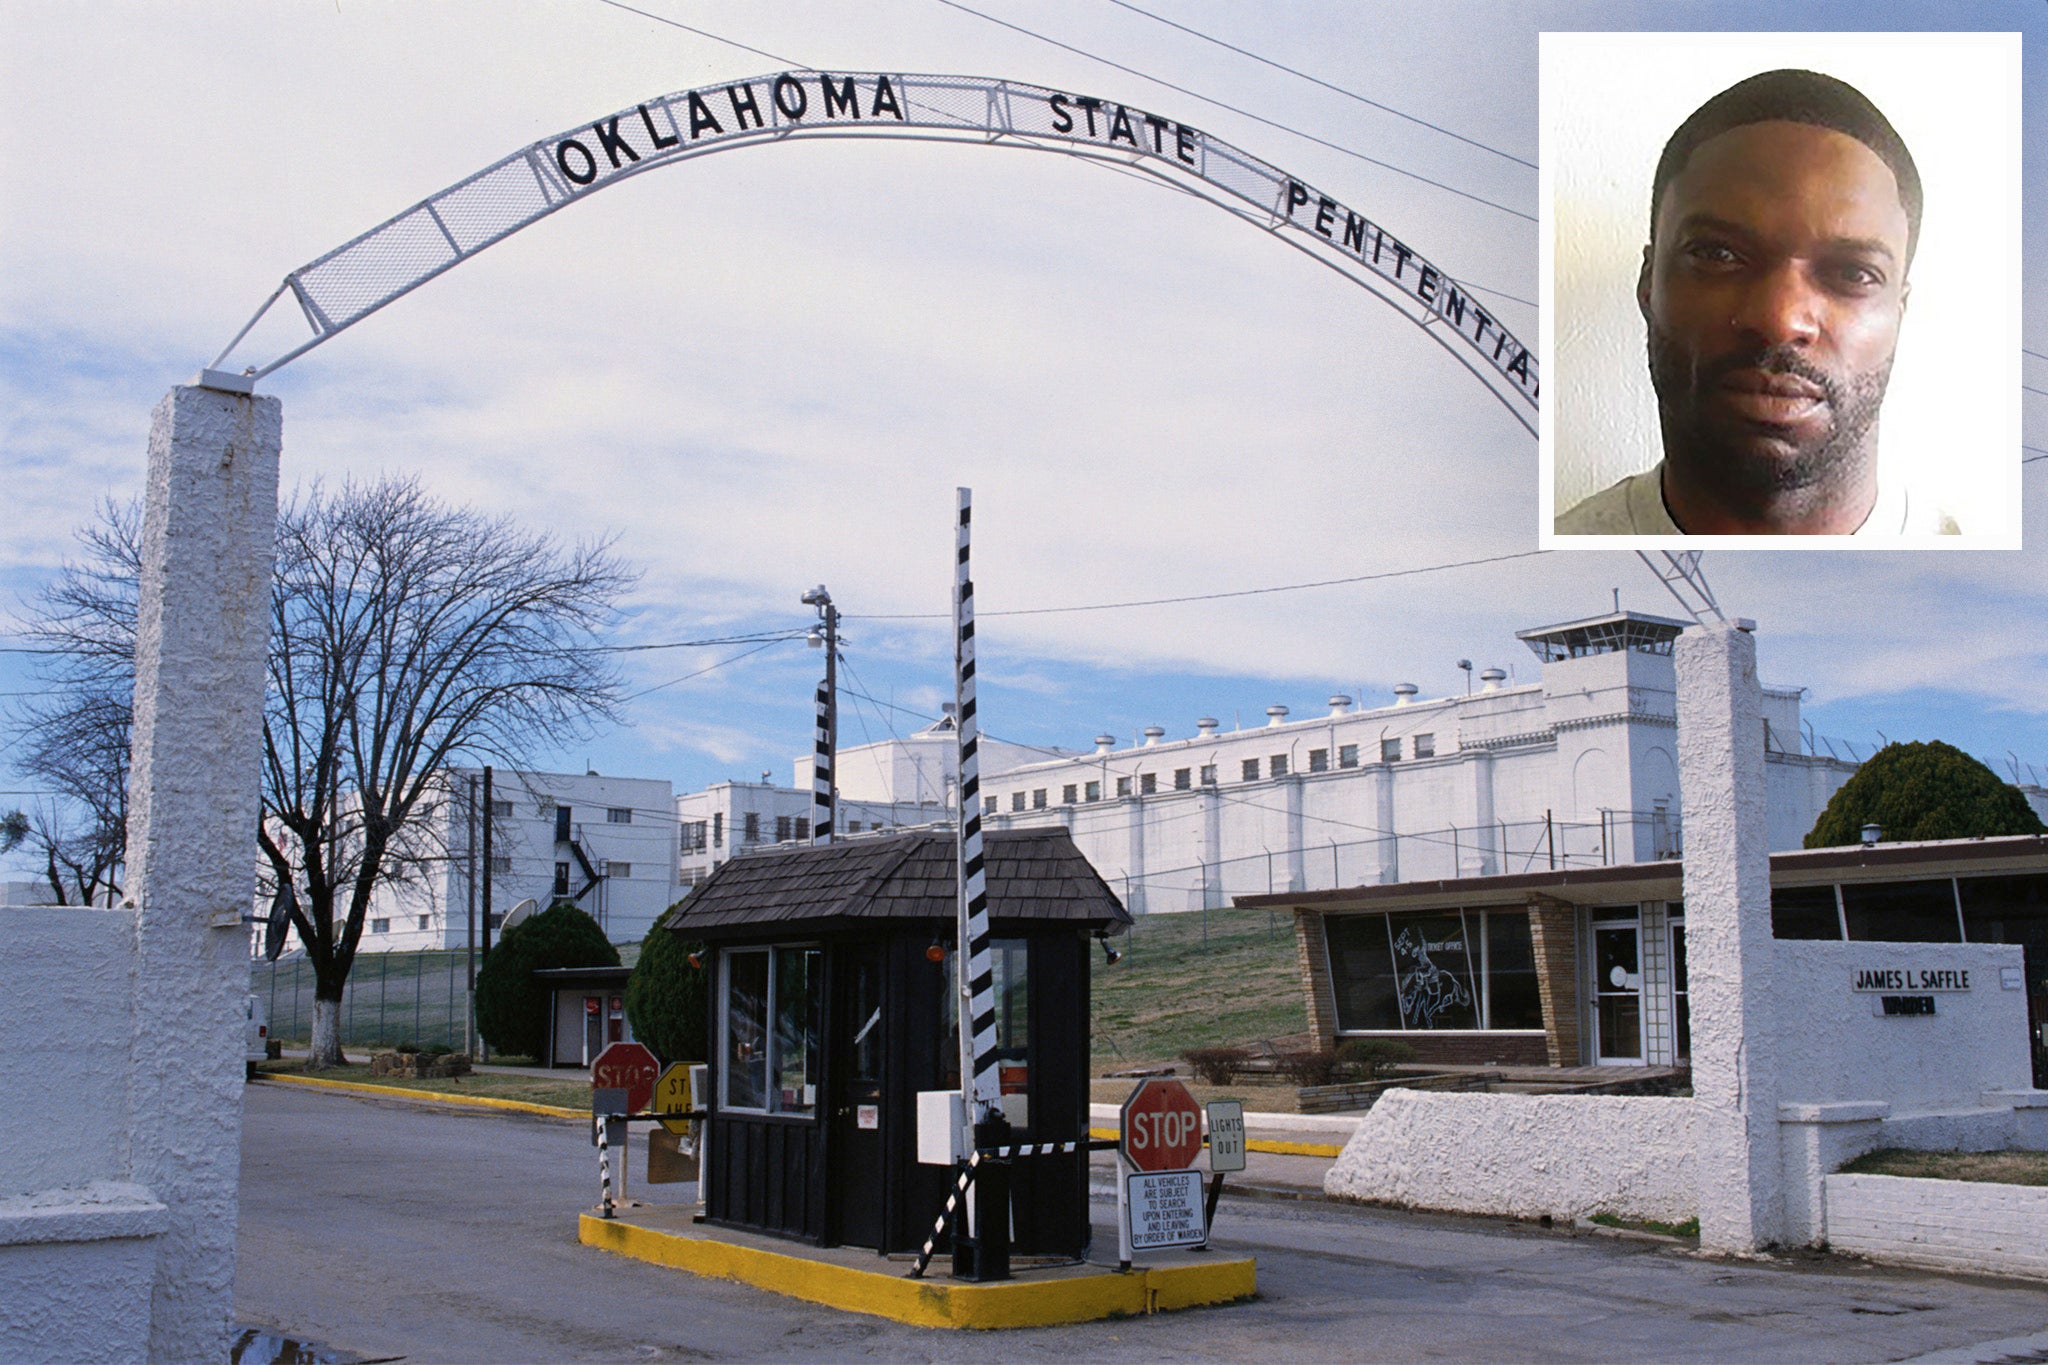 Michael DeWayne Smith faces execution by lethal injection at Oklahoma State Penitentiary